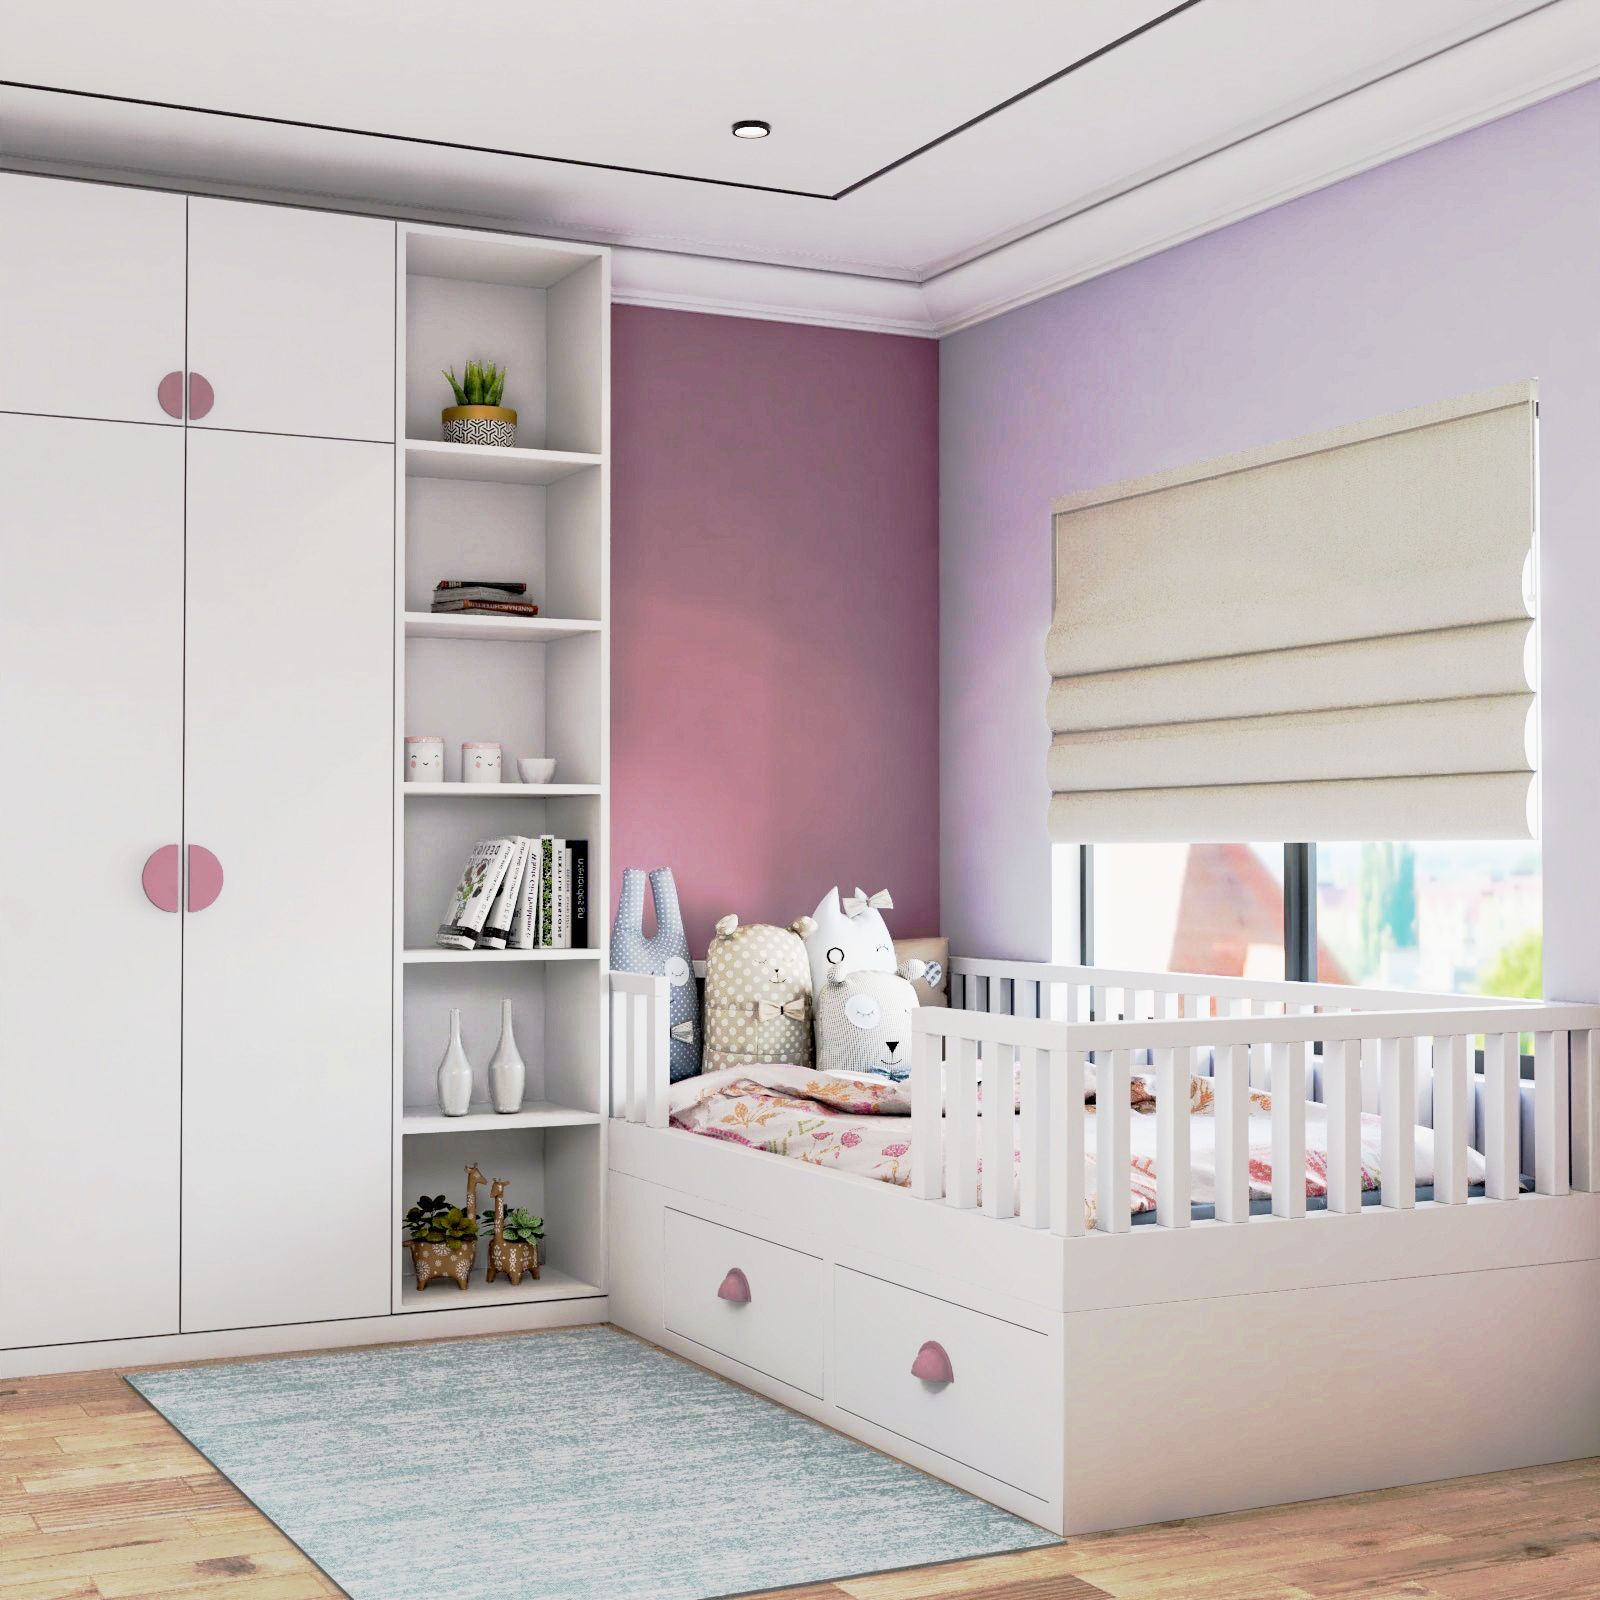 Minimal Kids Room Design With Pink And Lavender Accent Walls